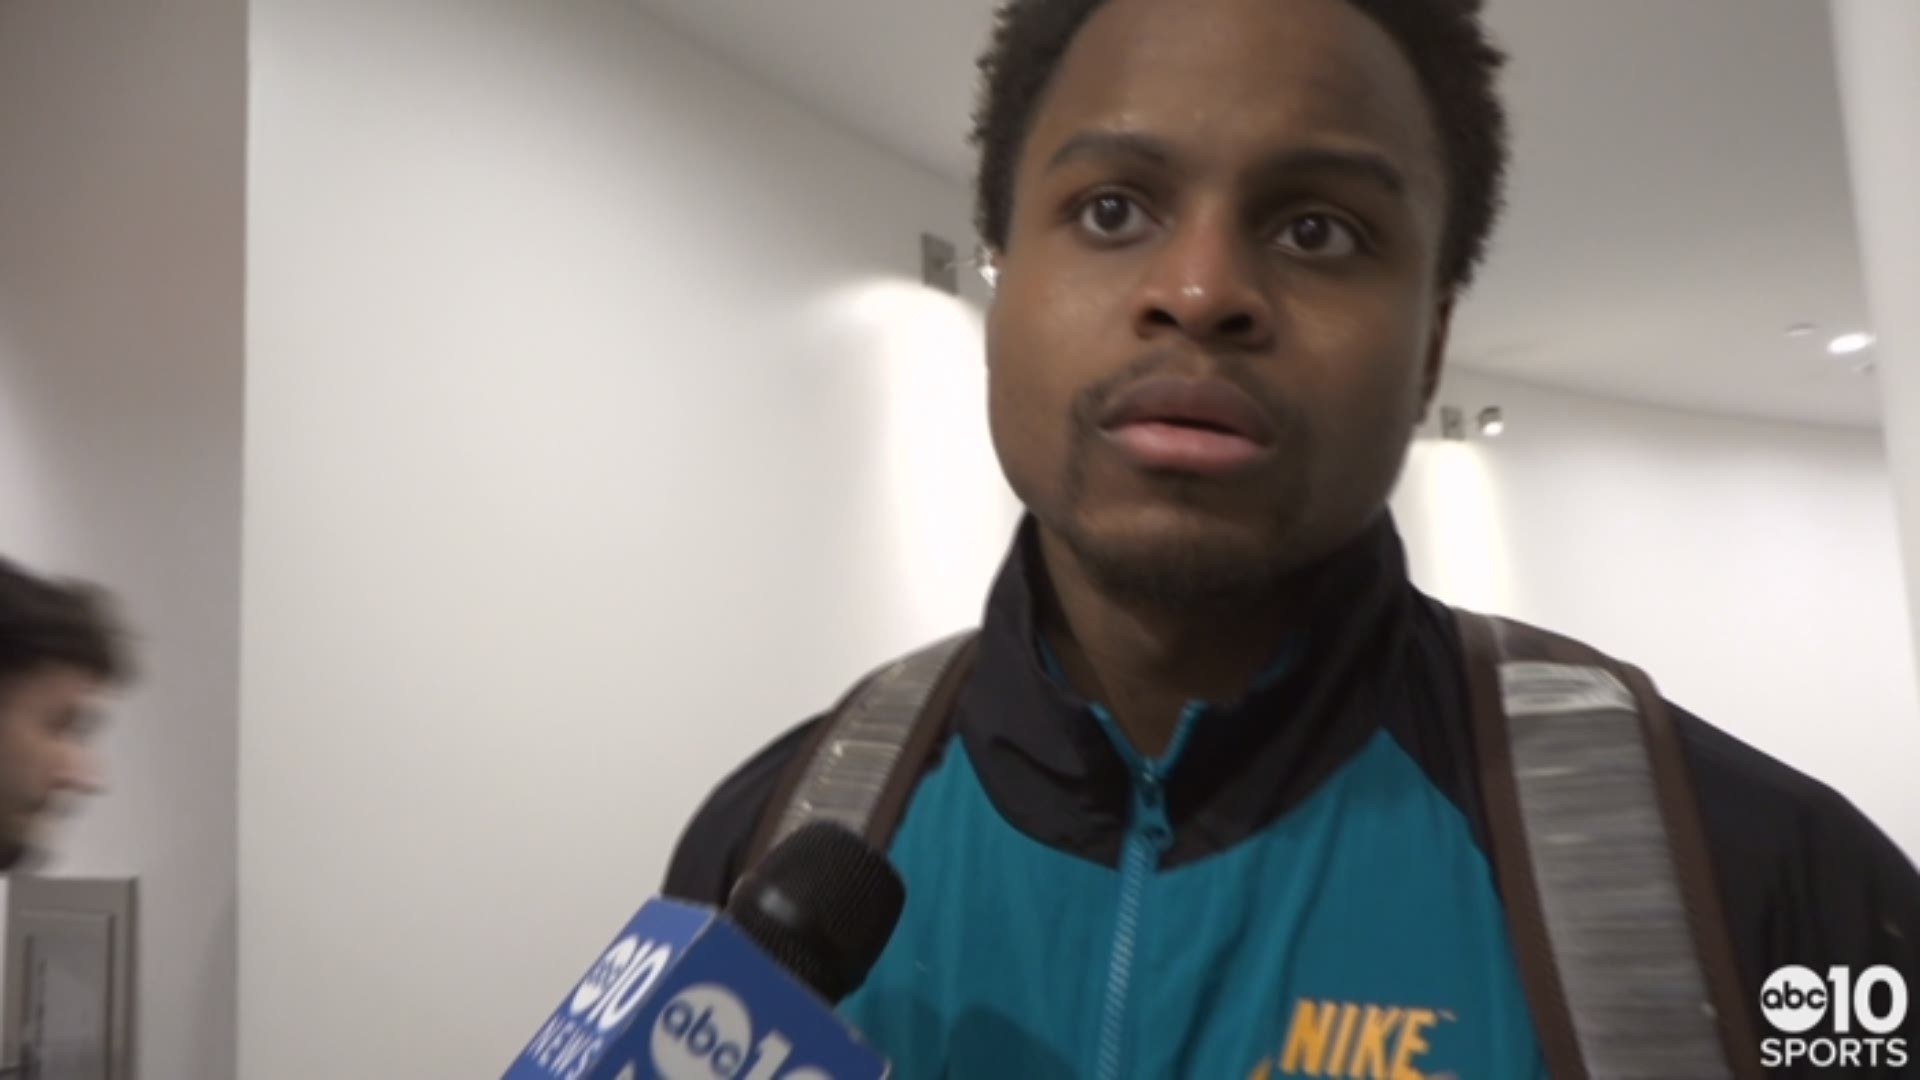 Kings point guard Yogi Ferrell discusses the production from the second unit, the career night from Harry Giles and entering the month of February with a winning record for the first time since the 2004-05 season.